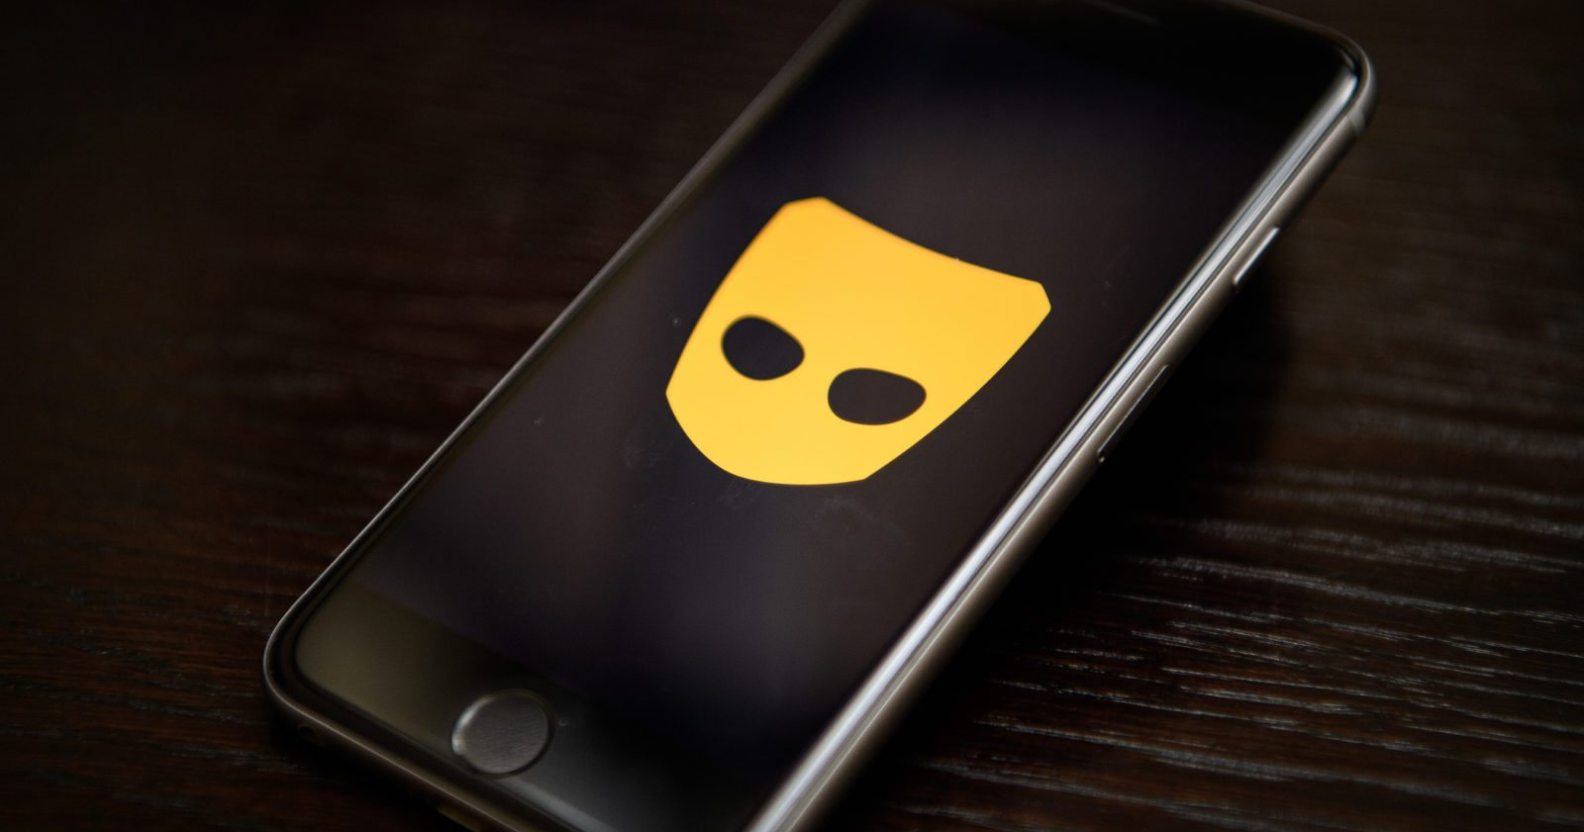 Grindr, the gay dating app